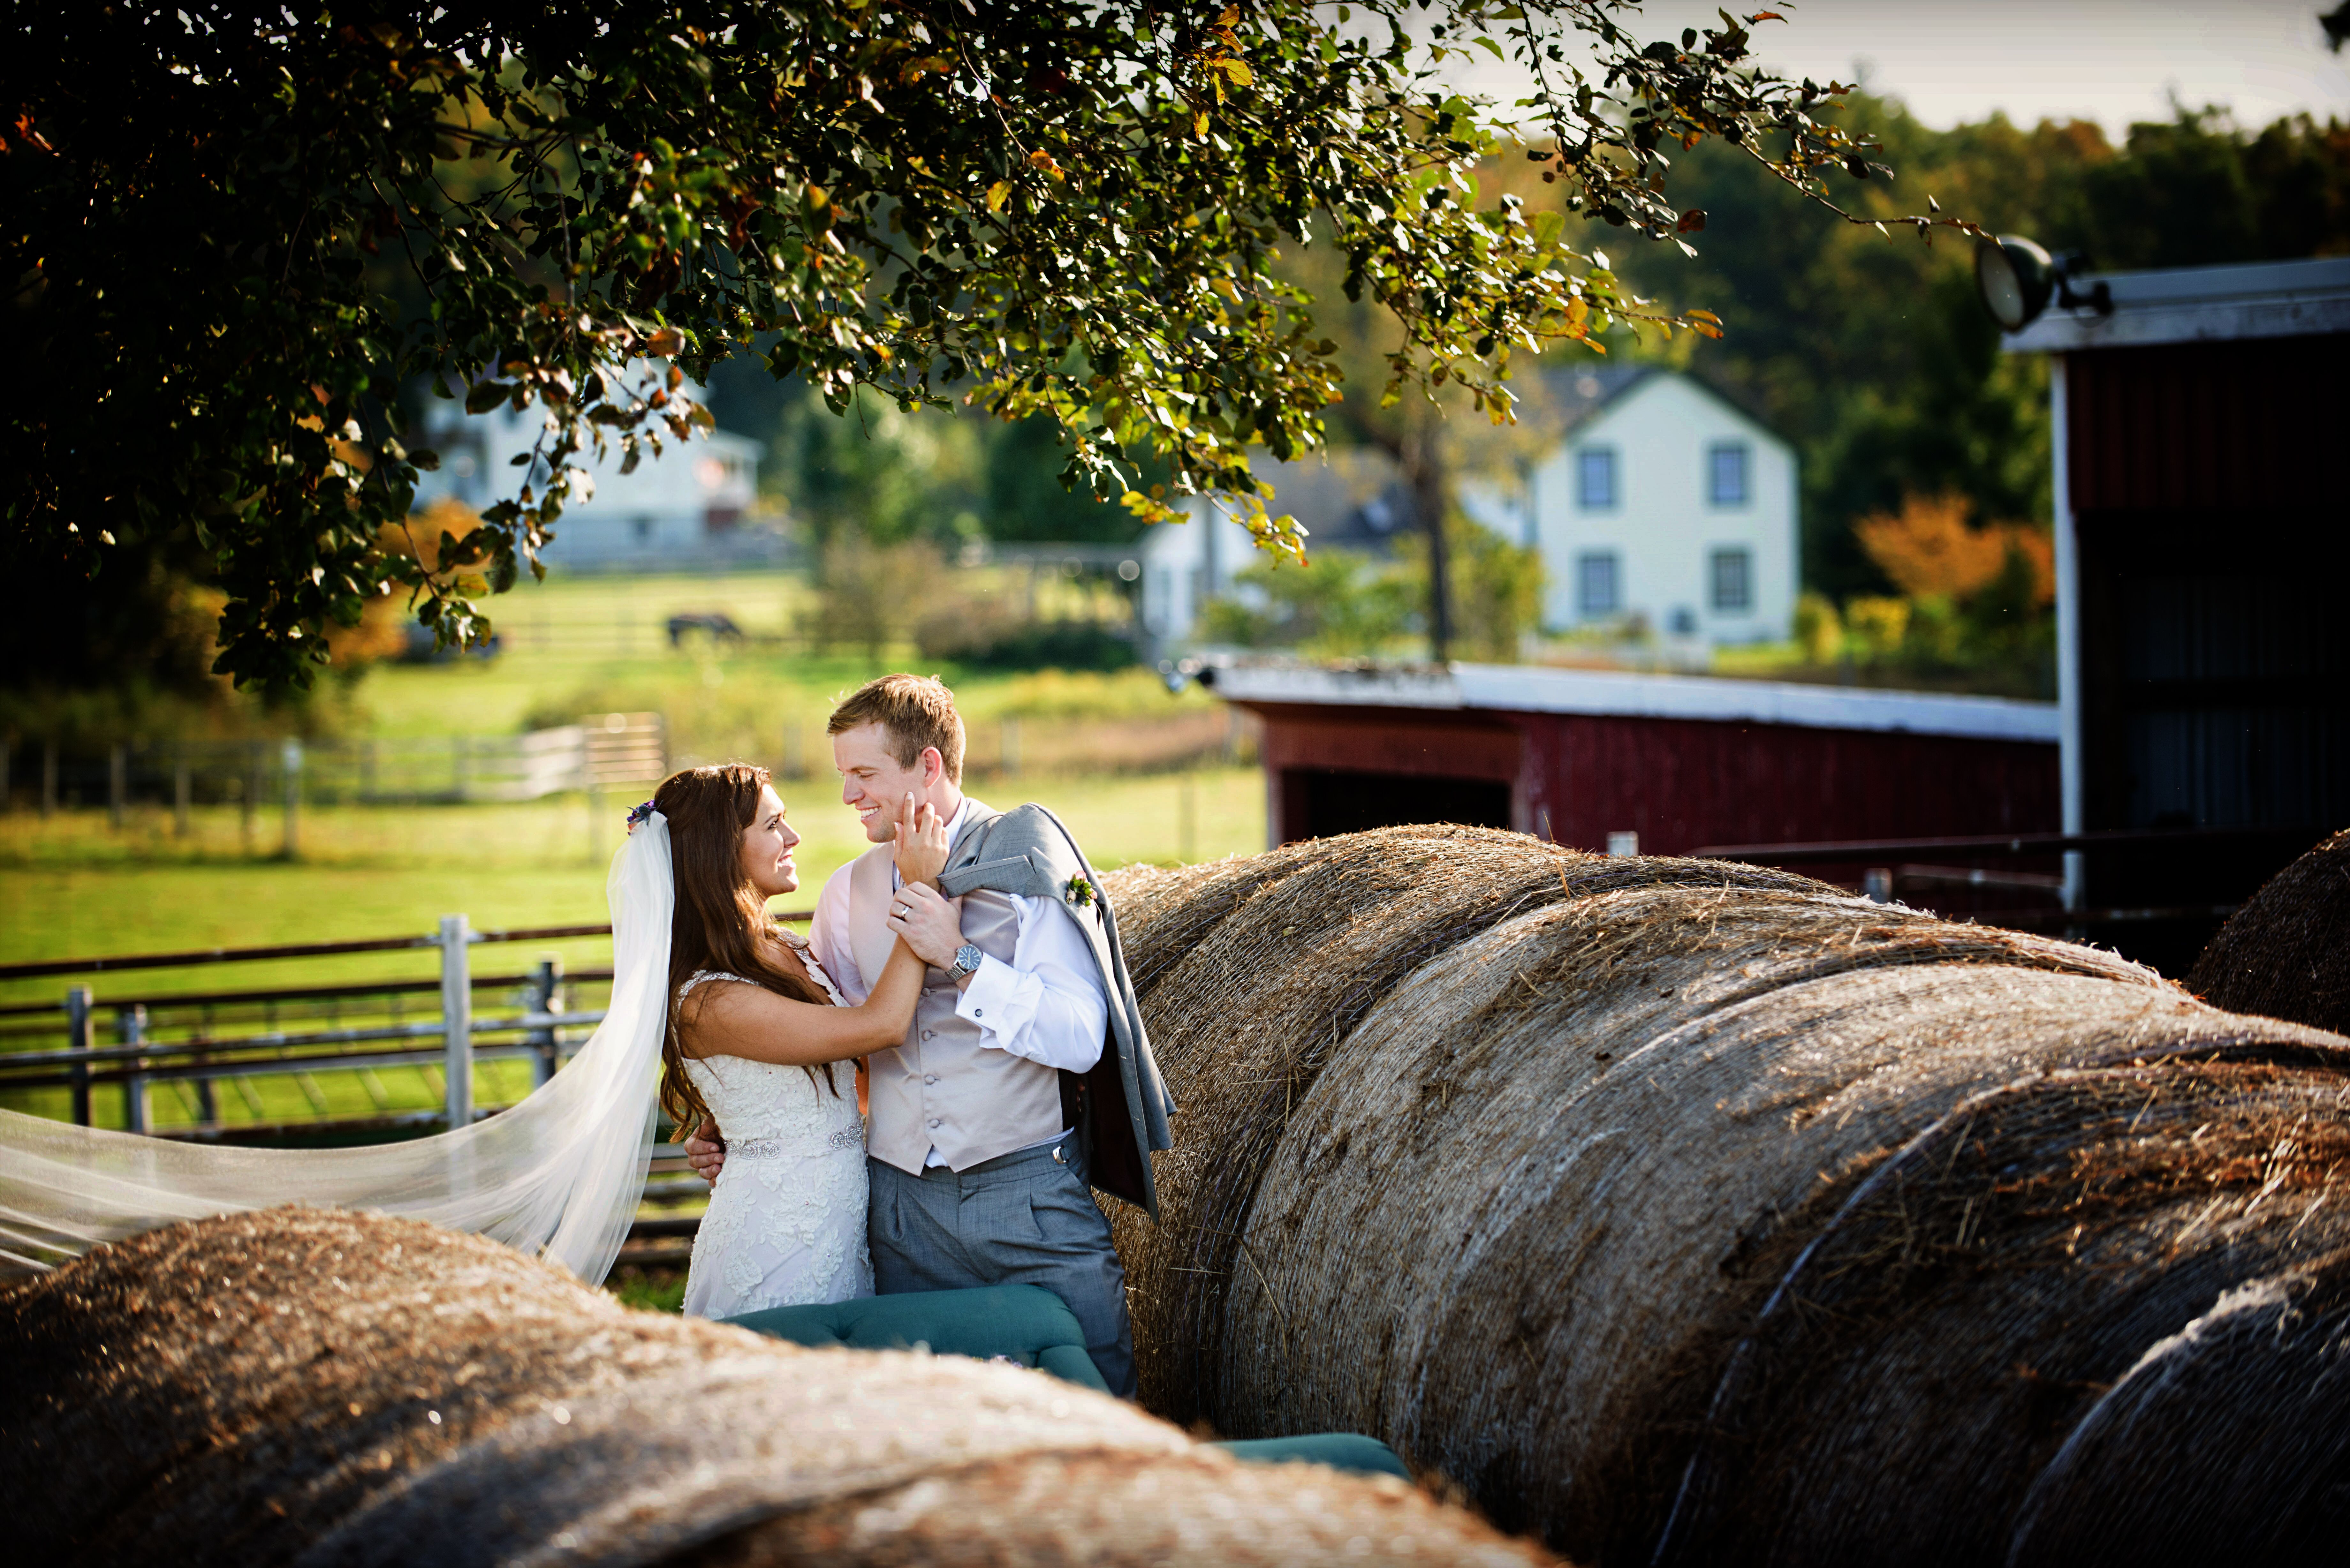 A Vintage Chic Barn Wedding  at Parks Show Cattle Farm in 